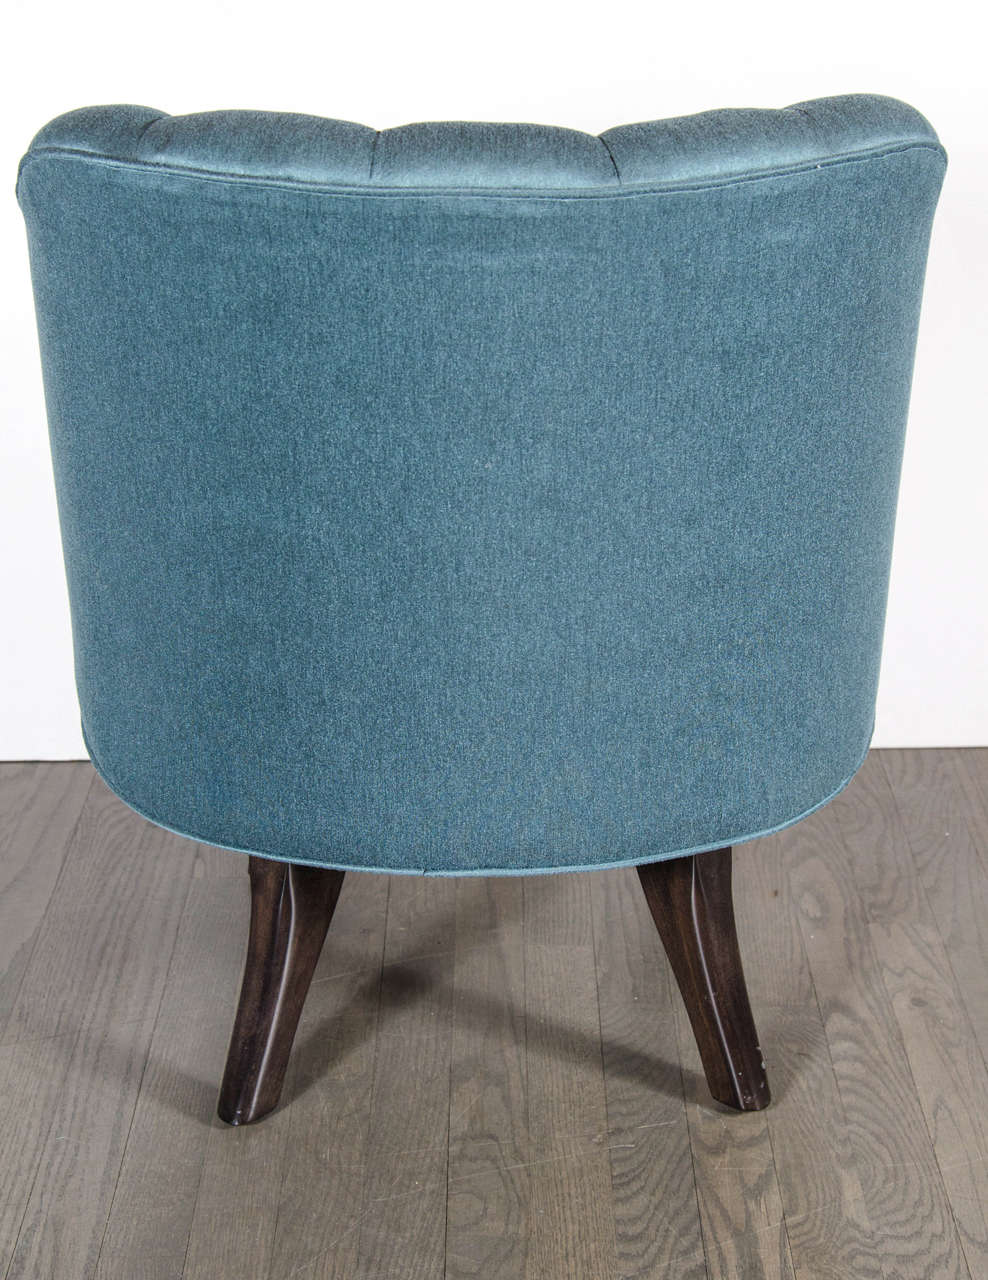 Mid-20th Century Pair of Mid-Century Modernist Tufted Back Swivel Chairs in Teal Upholstery